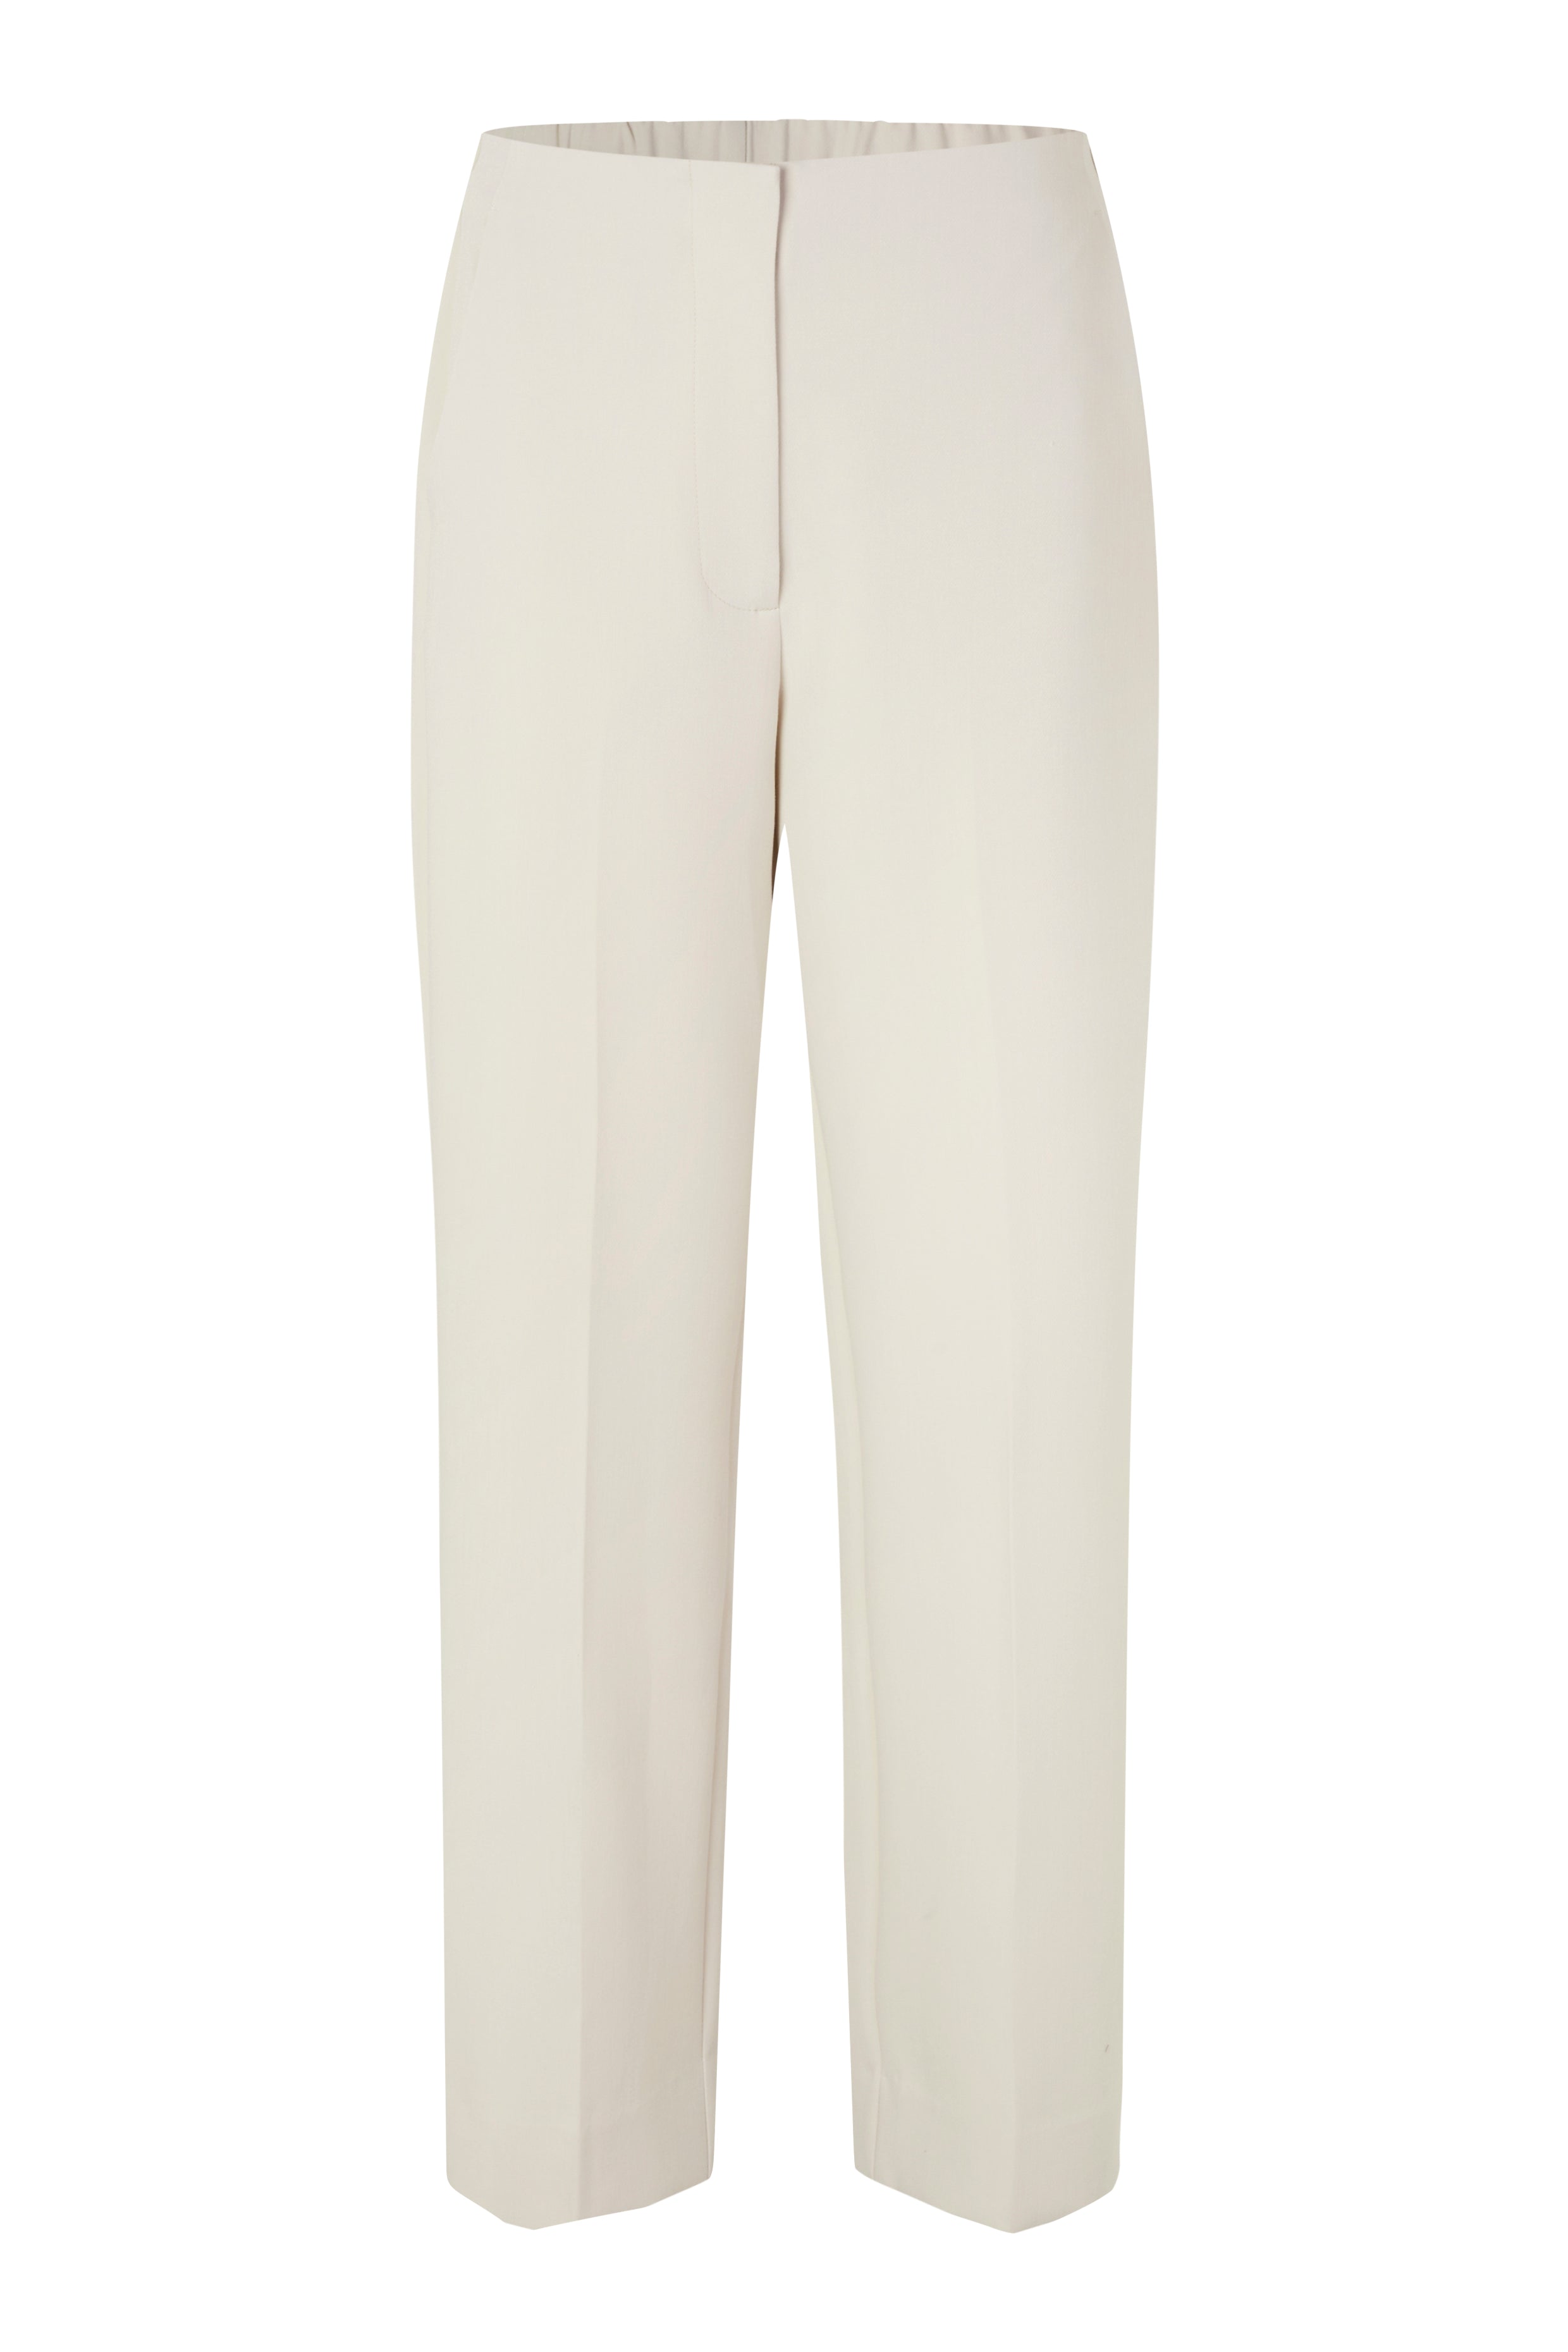 Evie Classic Trousers - French Oak